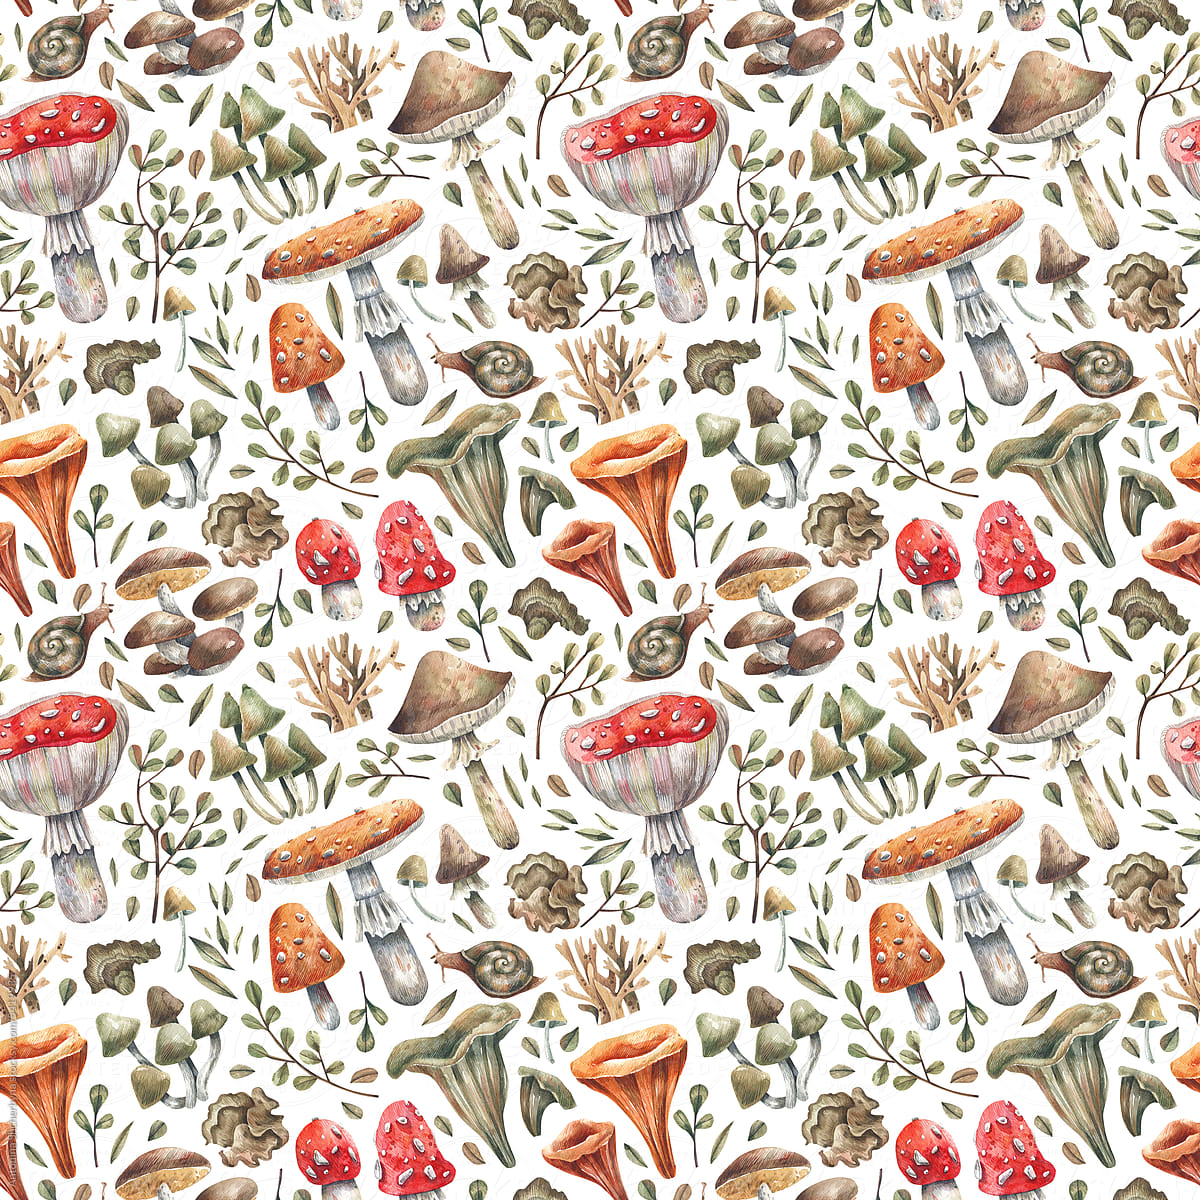 Watercolor pattern with forest mushrooms and plants